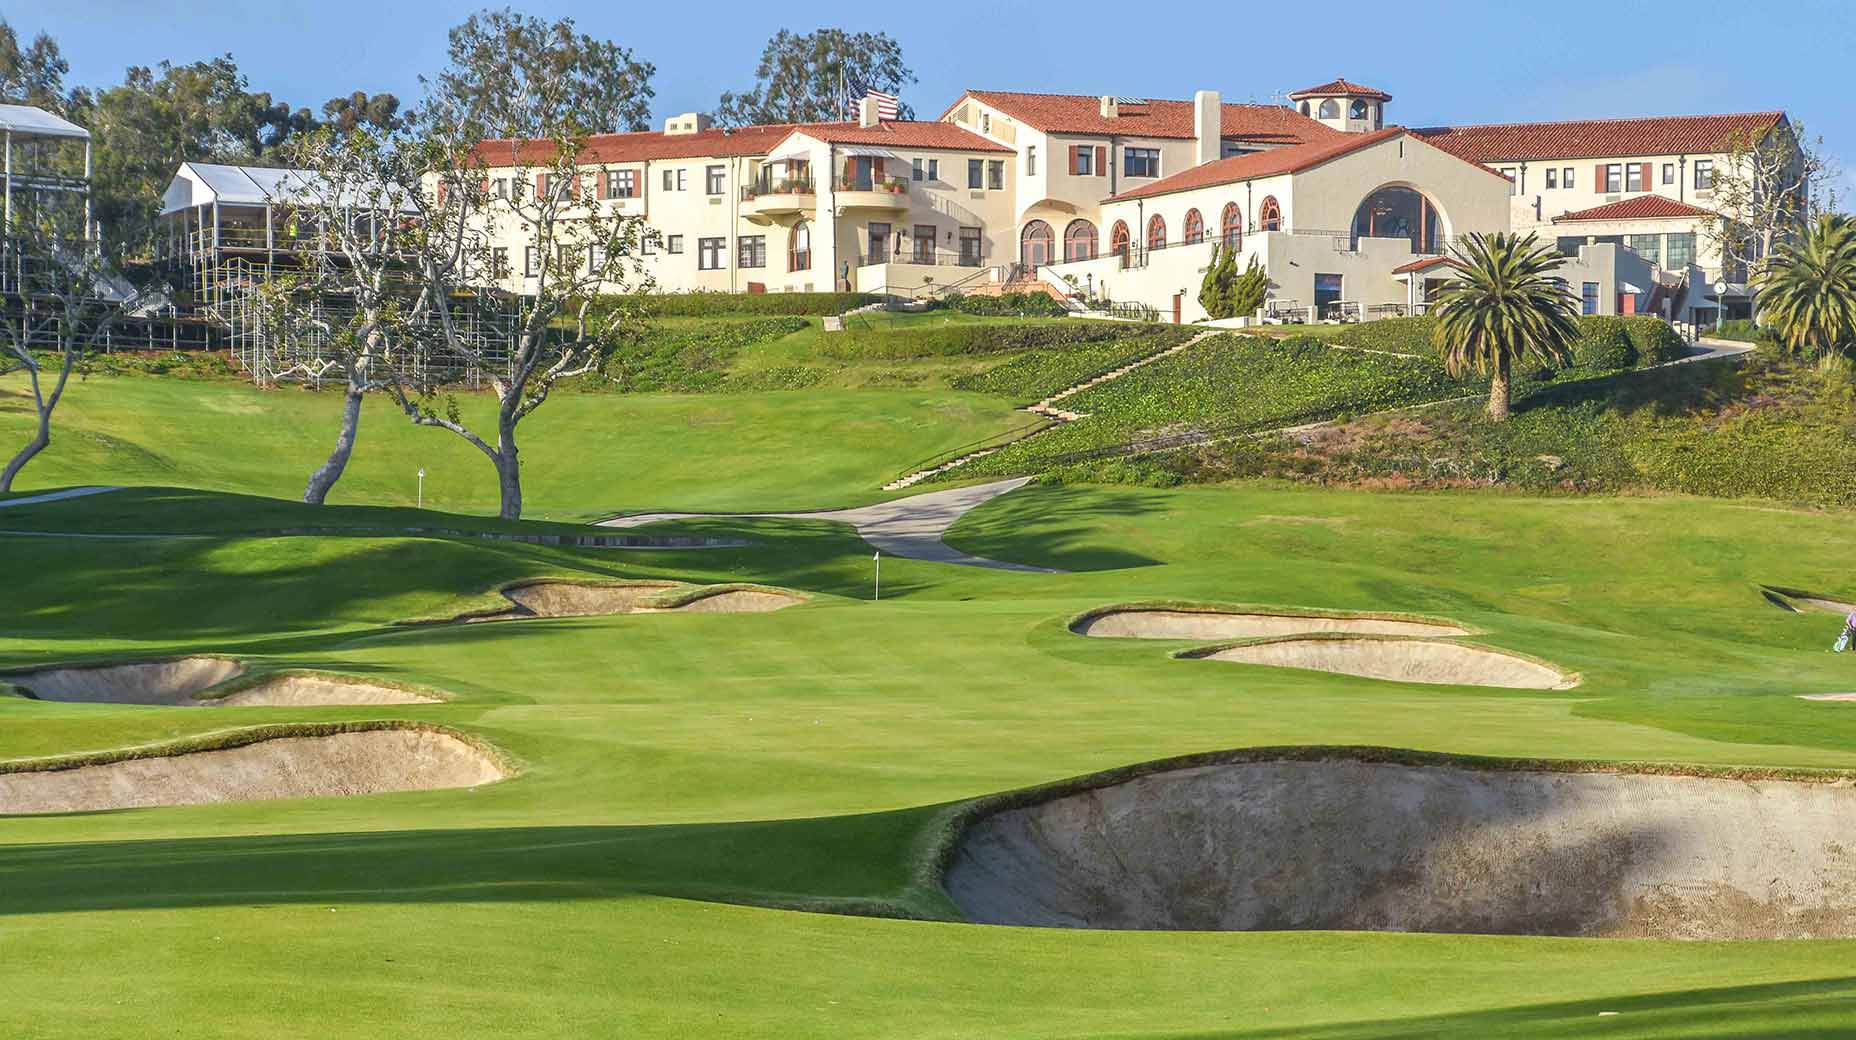 A golf hole at riviera country club